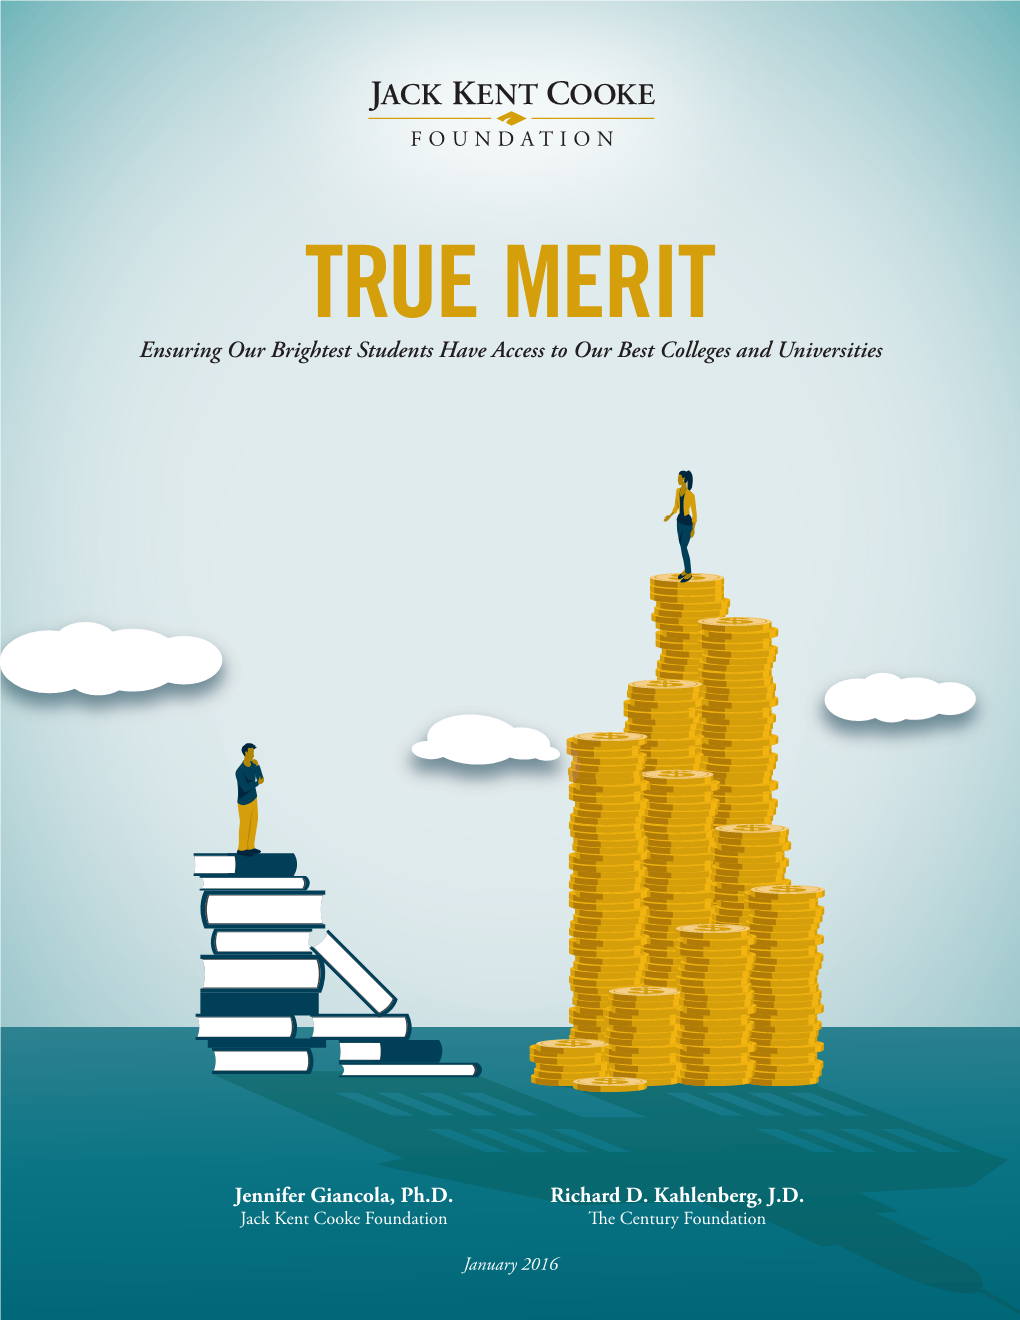 TRUE MERIT Ensuring Our Brightest Students Have Access to Our Best Colleges and Universities